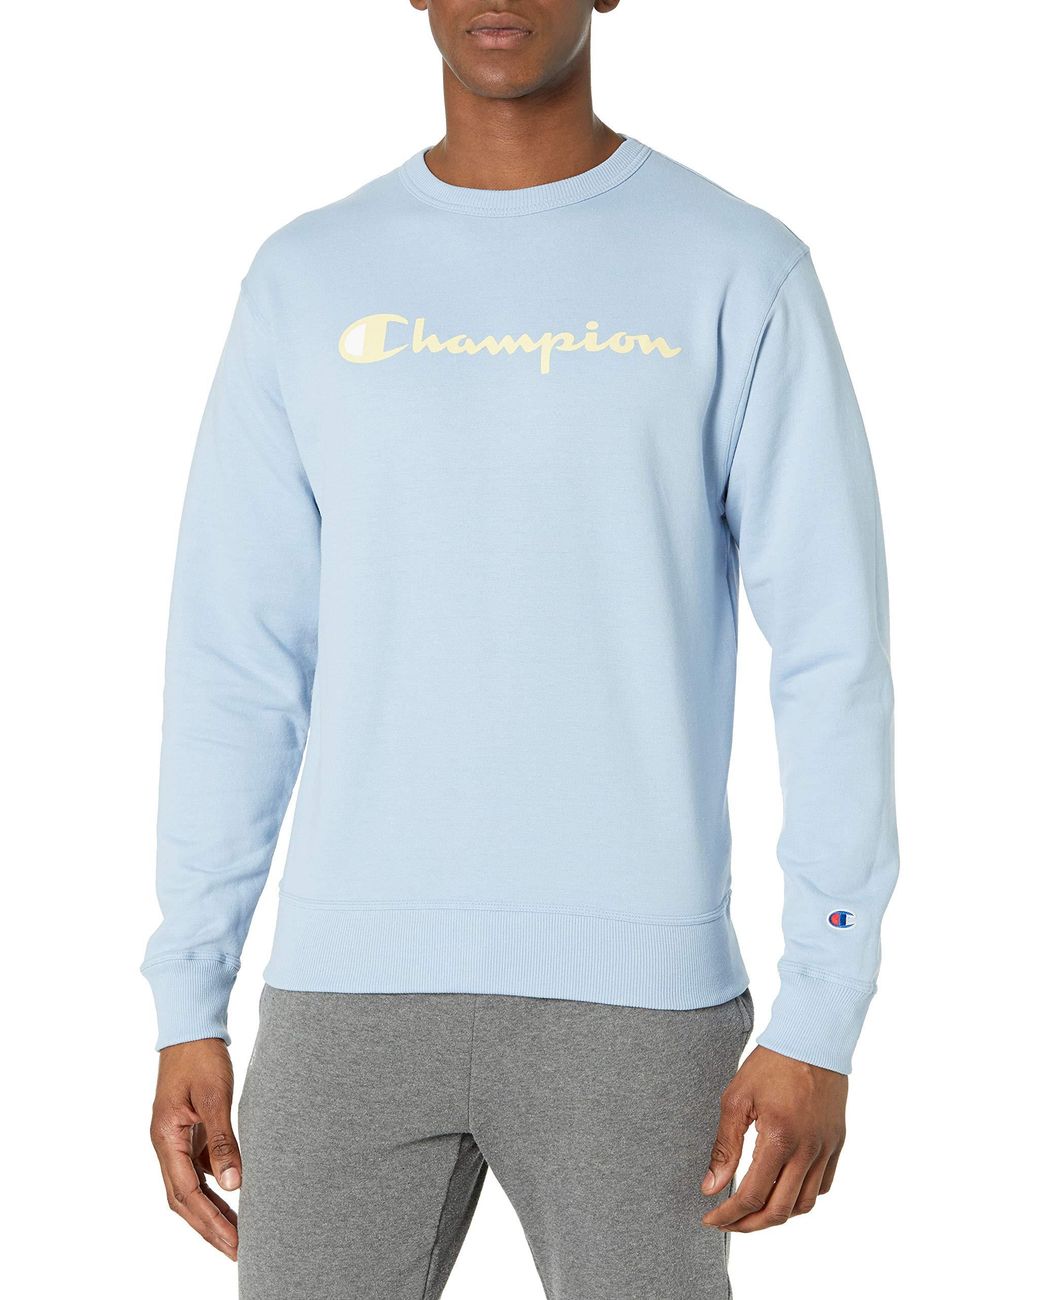 Champion Cotton Powerblend Crew in Blue for Men - Save 20% - Lyst